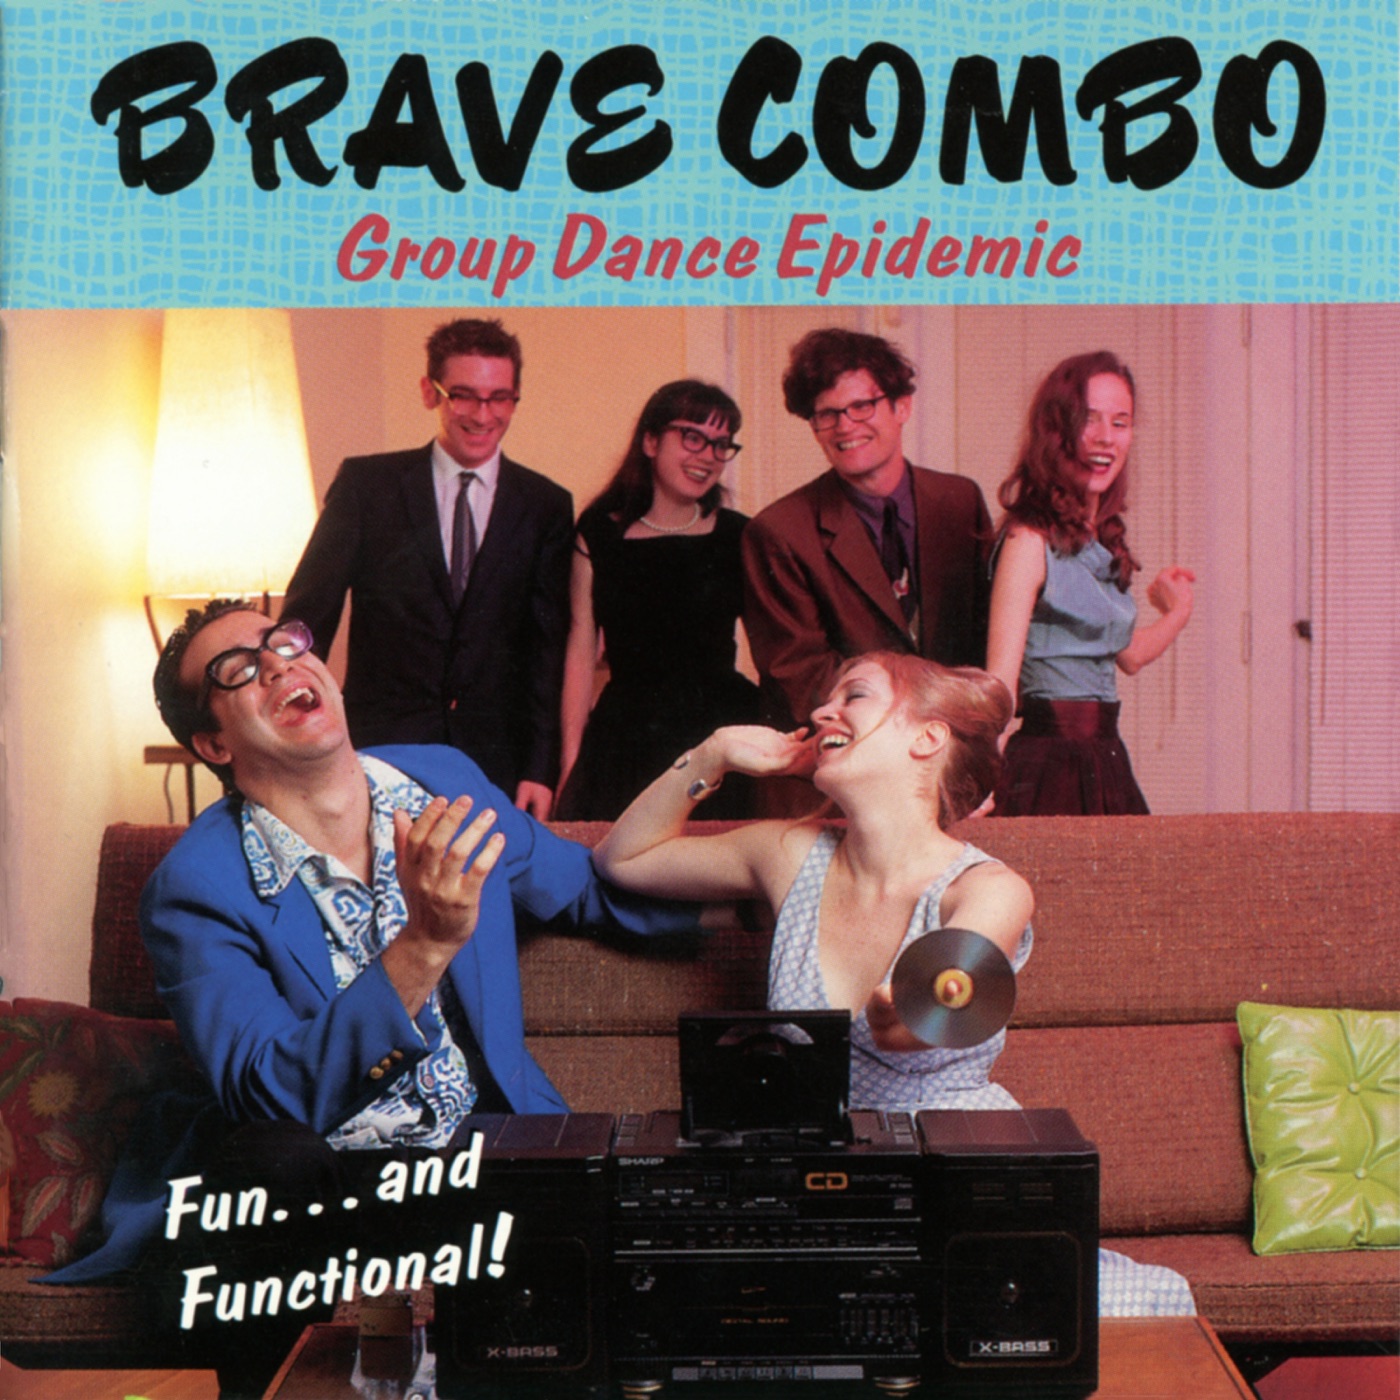 Group Dance Epidemic by Brave Combo